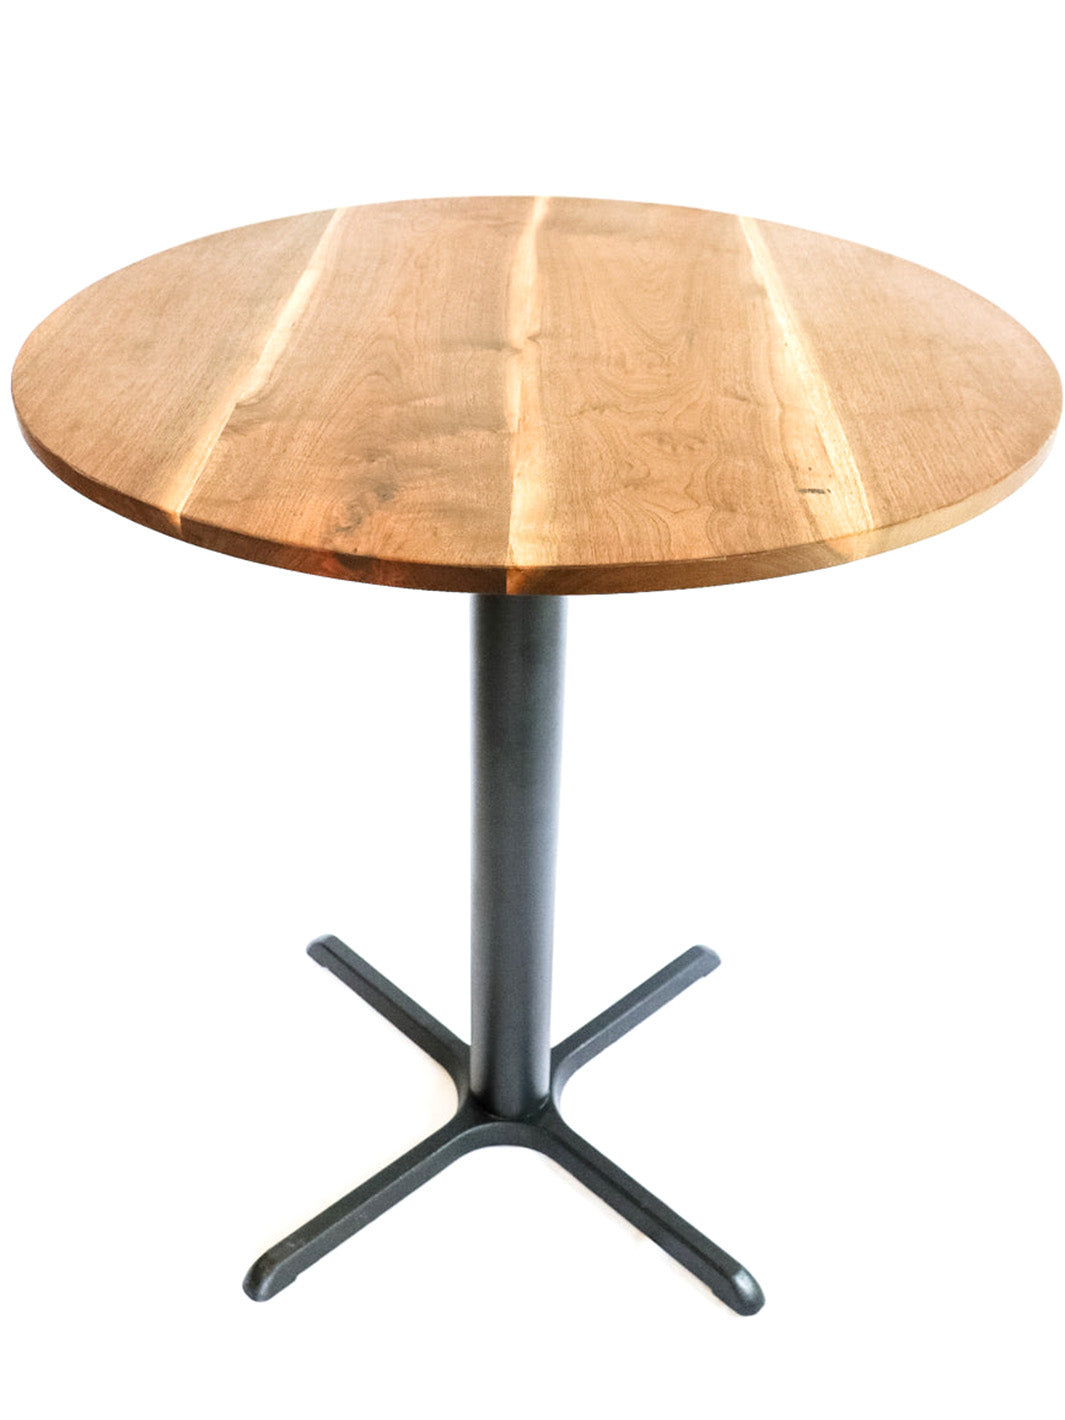 Modern Round Walnut Pub Table with Black Steel Legs | Bar or Standard Height Earthly Comfort Dining Tables 804-10